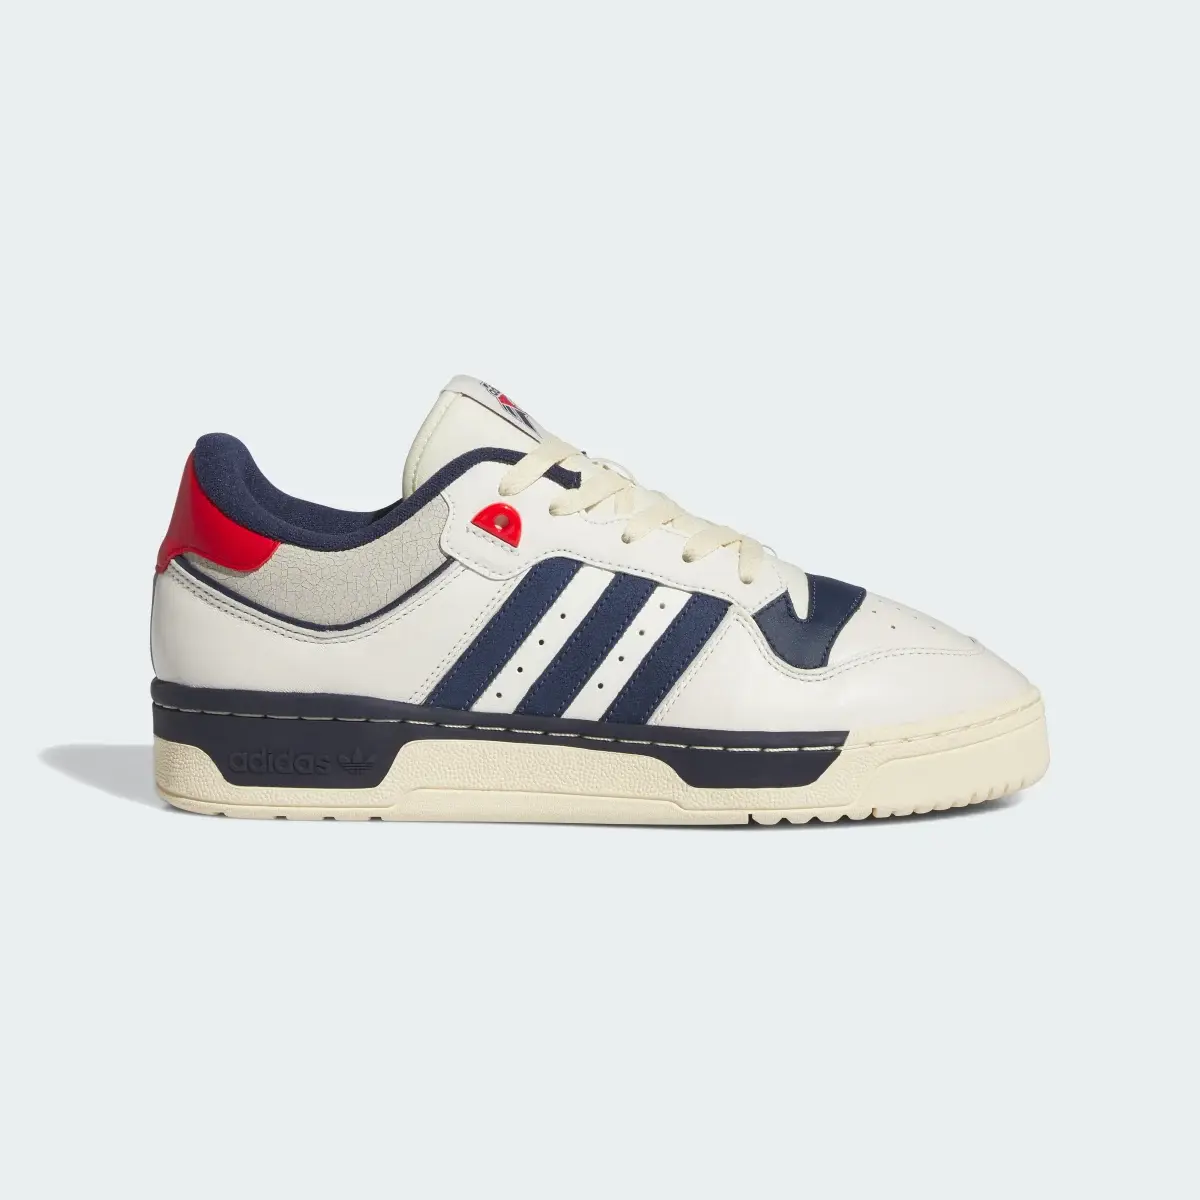 Adidas Rivalry 86 Low Schuh. 2